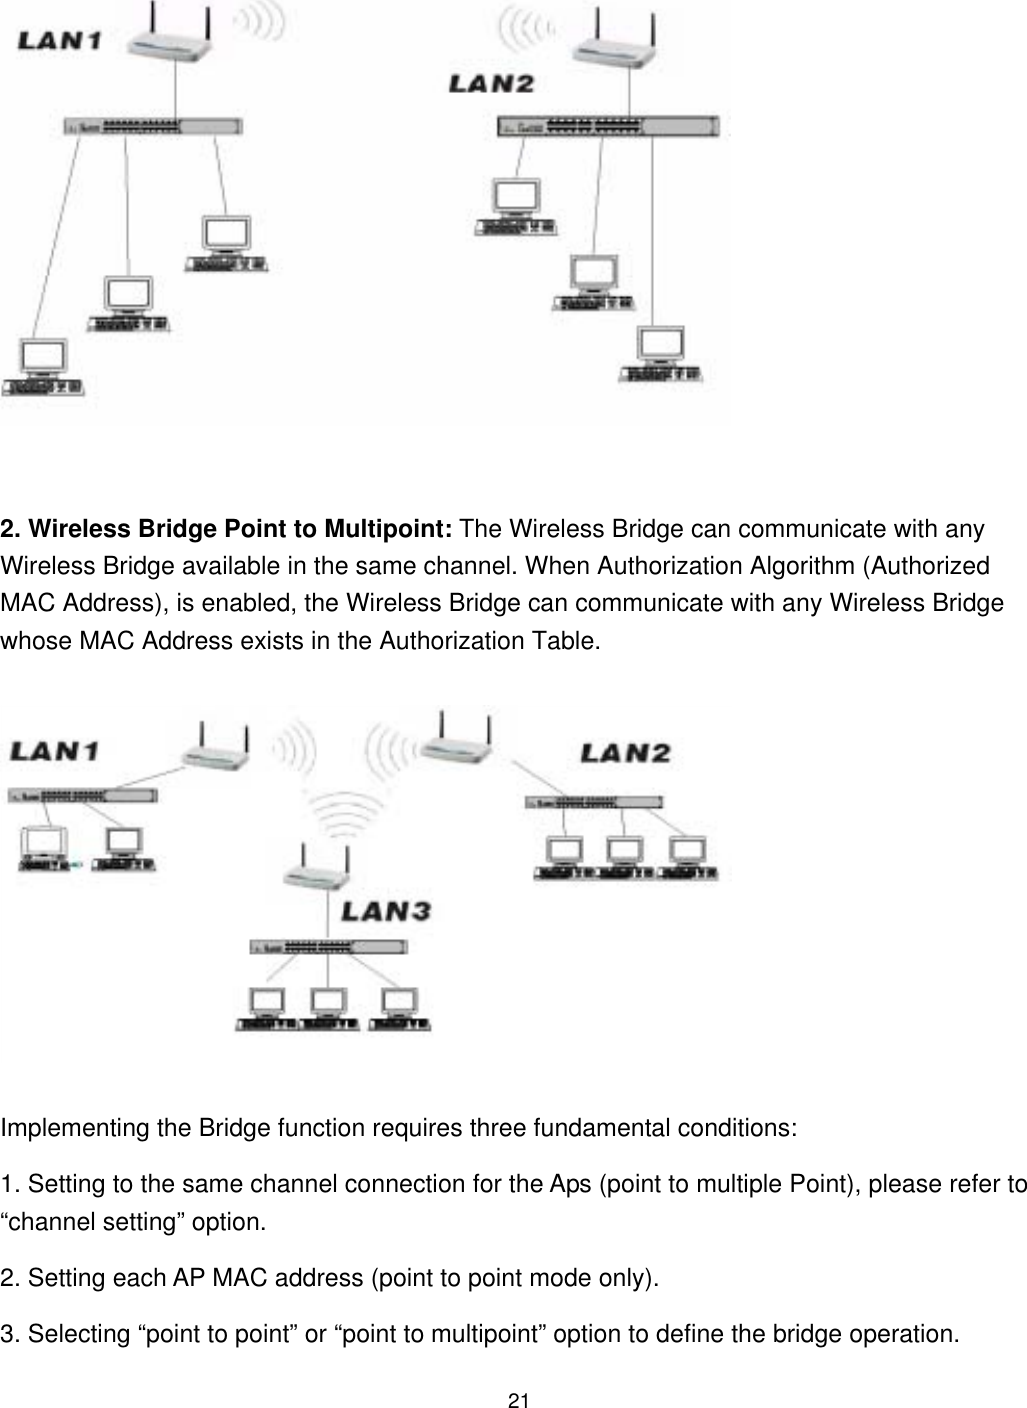            2. Wireless Bridge Point to Multipoint: The Wireless Bridge can communicate with any Wireless Bridge available in the same channel. When Authorization Algorithm (Authorized MAC Address), is enabled, the Wireless Bridge can communicate with any Wireless Bridge whose MAC Address exists in the Authorization Table.  Implementing the Bridge function requires three fundamental conditions: 1. Setting to the same channel connection for the Aps (point to multiple Point), please refer to “channel setting” option. 2. Setting each AP MAC address (point to point mode only). 3. Selecting “point to point” or “point to multipoint” option to define the bridge operation.  21